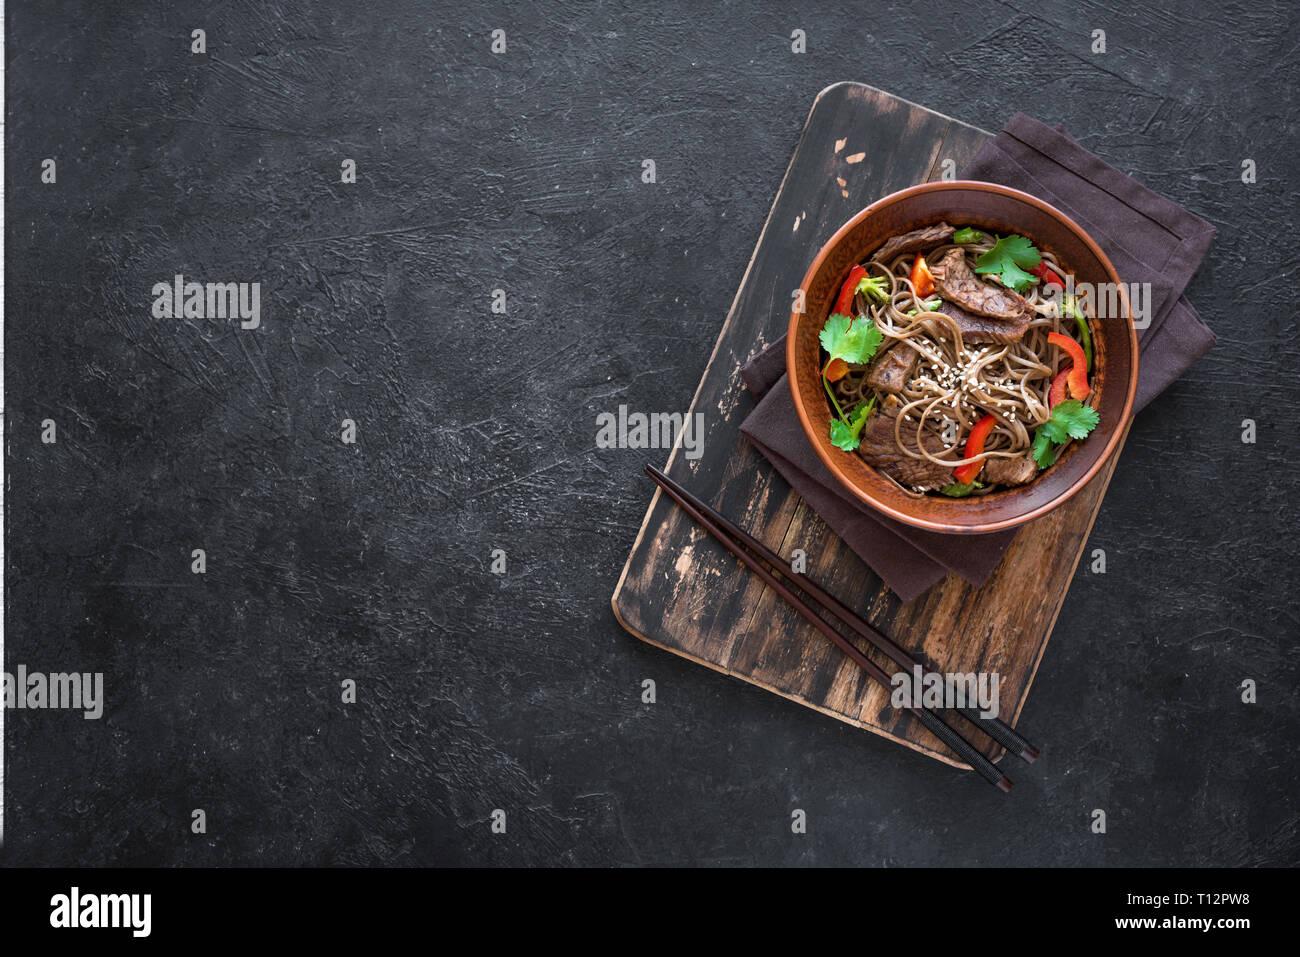 Stir fry with soba noodles, beef and vegetables. Asian healthy food, stir fried meal in bowl on black background, top view, copy space. Stock Photo